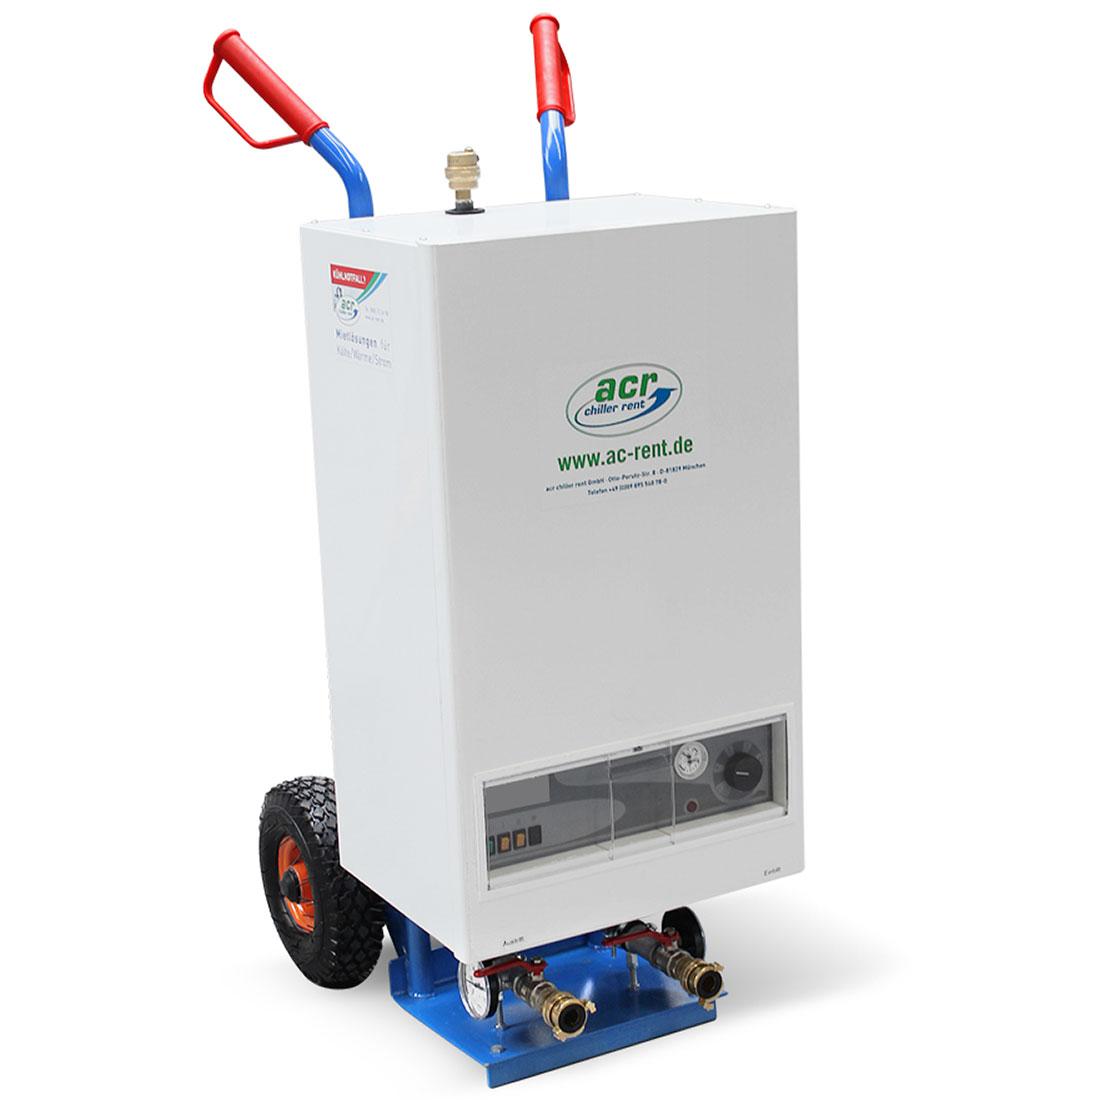 Product ACR-EHW-28 - acr chiller rent gmbh - process cooling and comfort air conditioning image